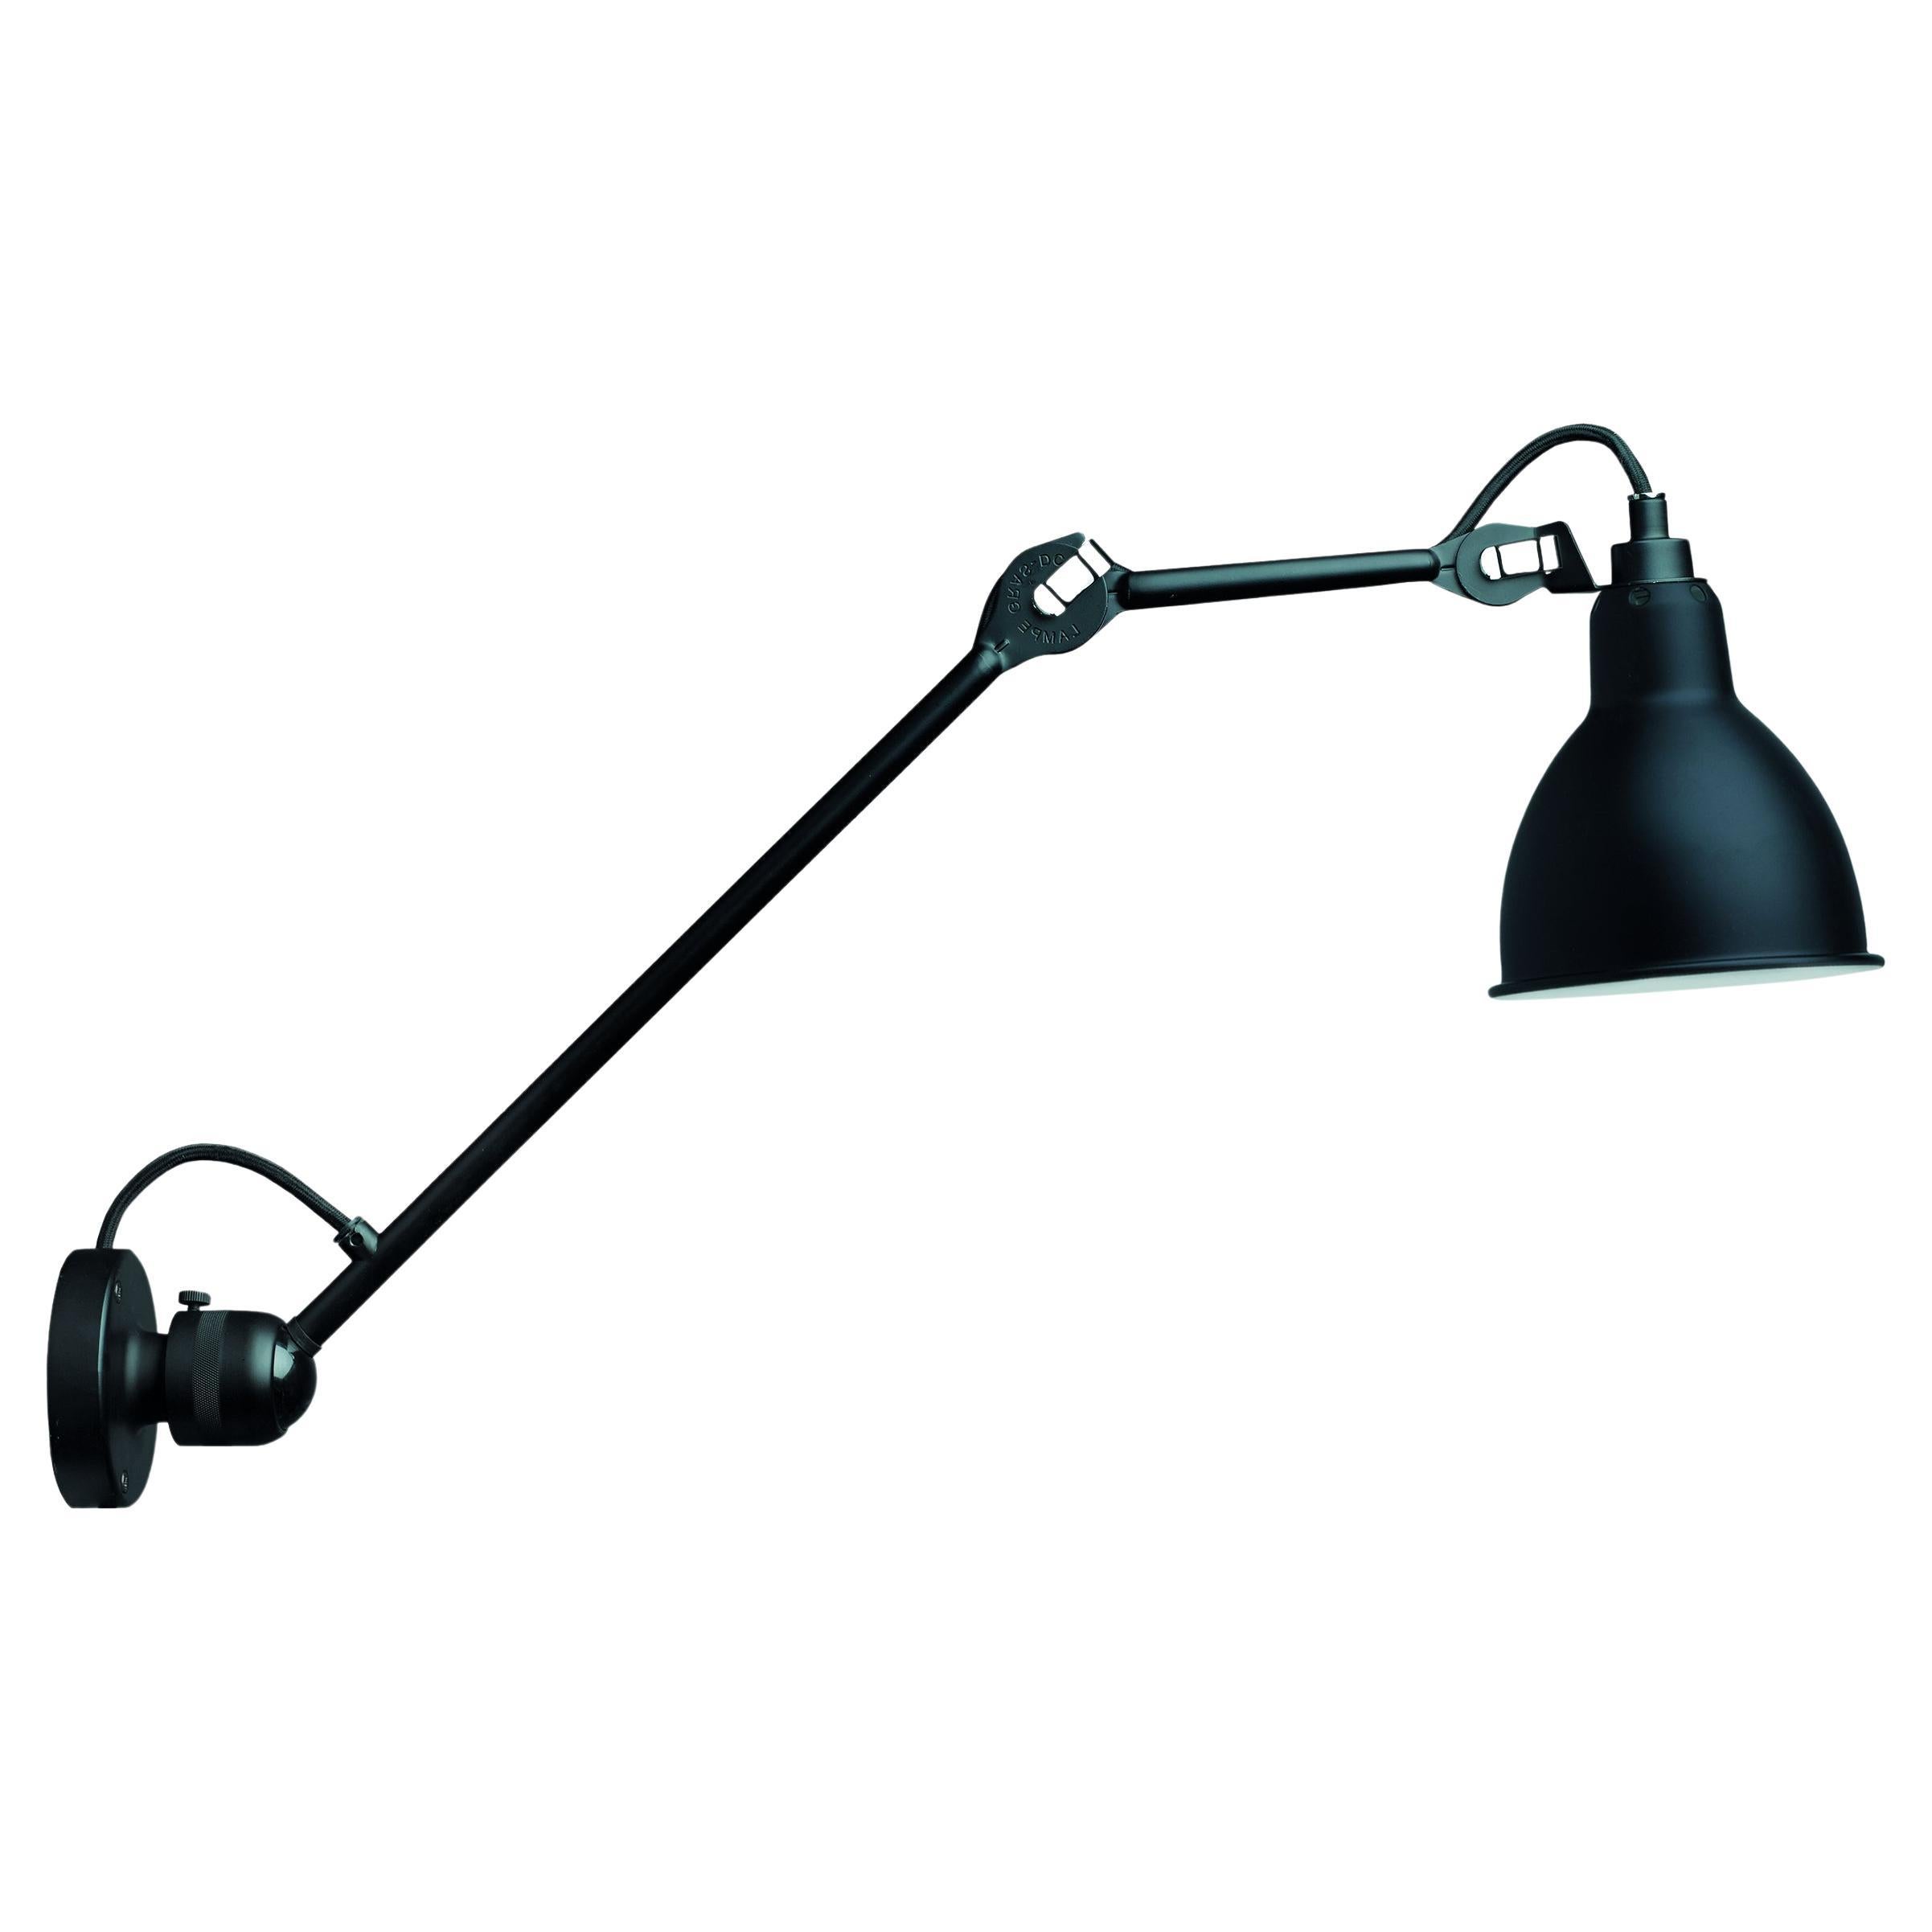 DCW Editions La Lampe Gras N°304 L40 Wall Lamp in Black Arm and Black Shade For Sale